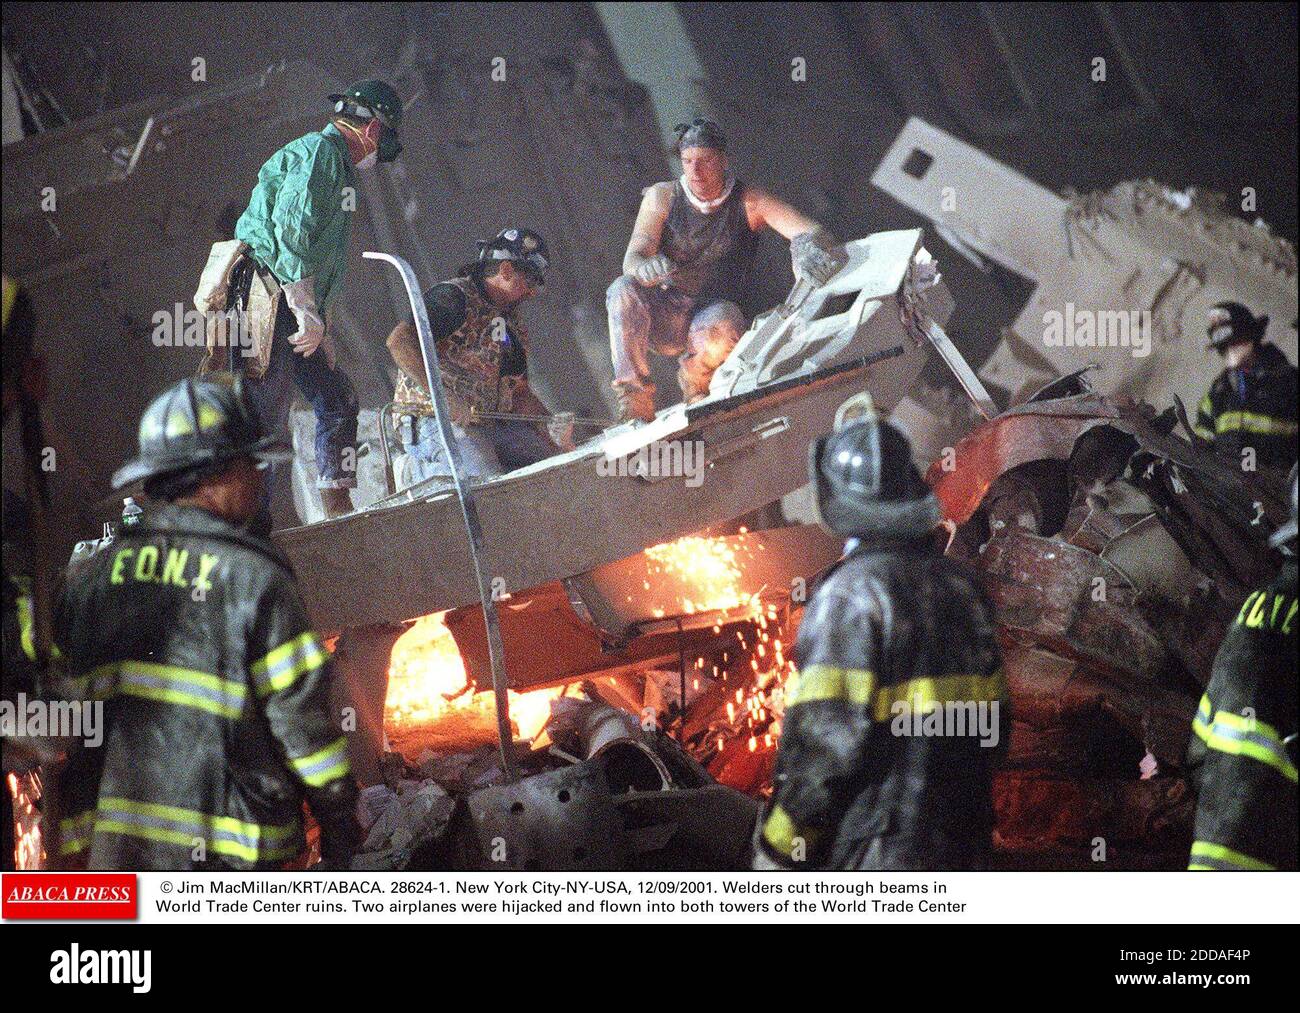 NO FILM, NO VIDEO, NO TV, NO DOCUMENTARY - © Jim MacMillan/KRT/ABACA. 28624-1. New York City-NY-USA, 12/09/2001. Welders cut through beams in World Trade Center ruins. Two airplanes were hijacked and flown into both towers of the World Trade Center Stock Photo